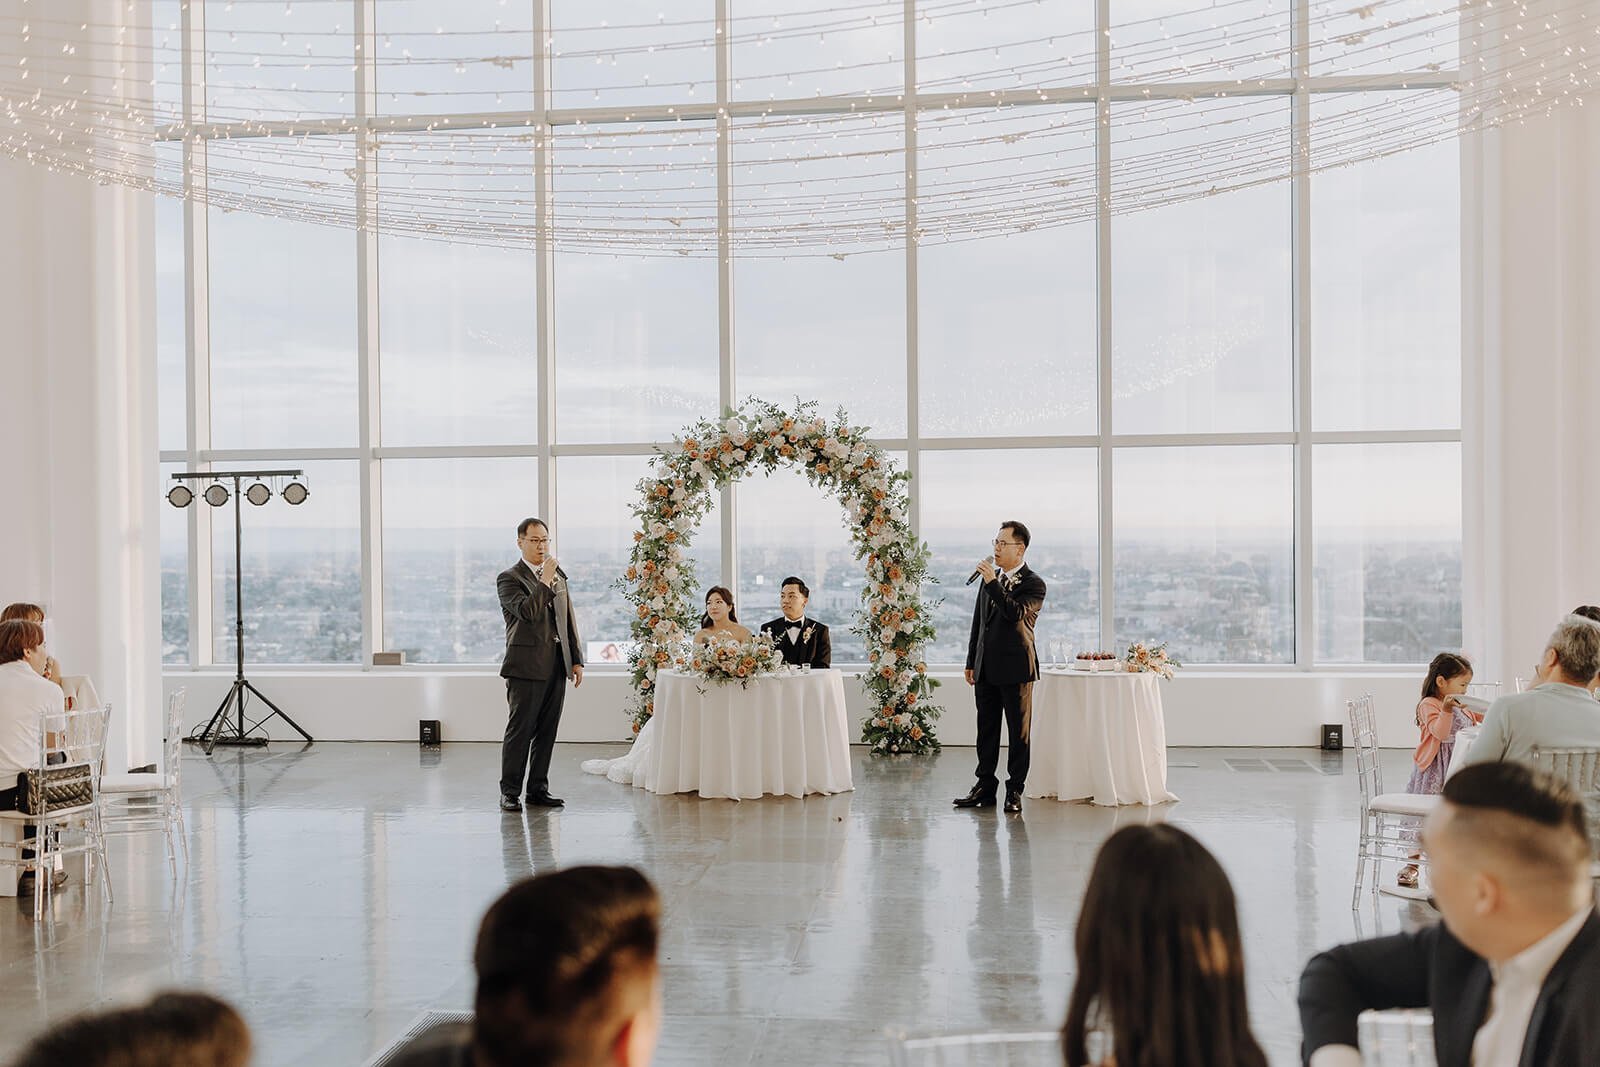 Fathers sing to bride and groom during city wedding reception